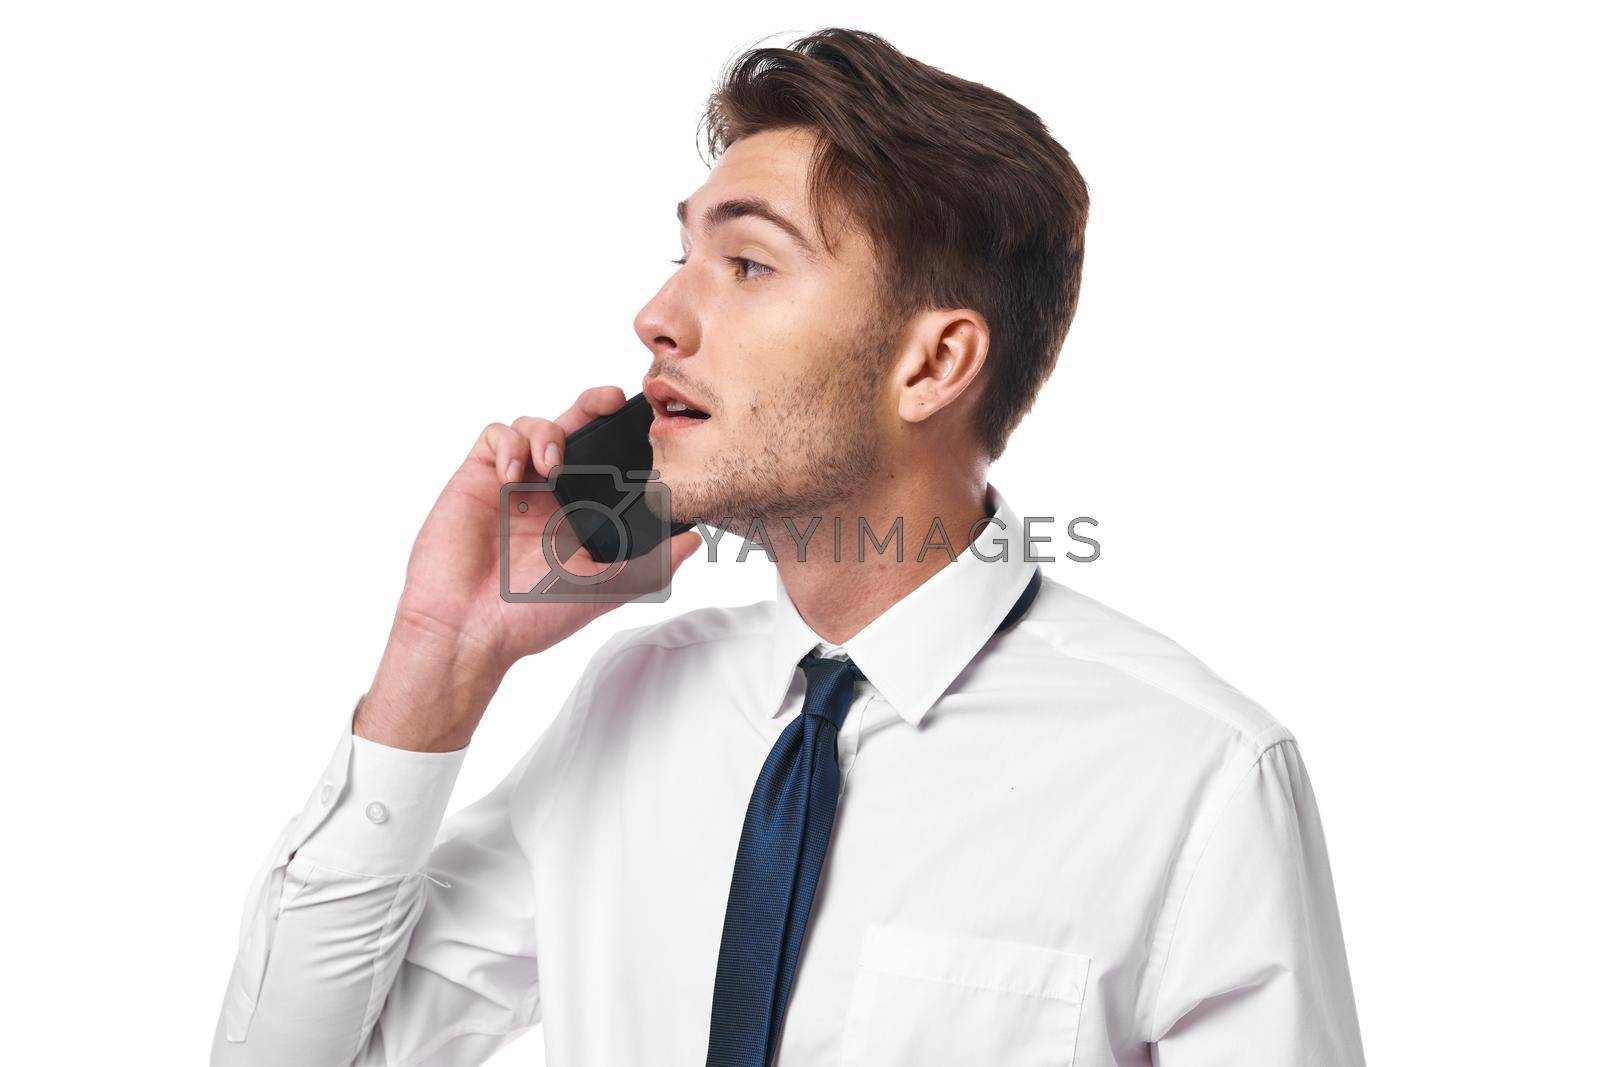 a person phone communication success work office isolated background. High quality photo